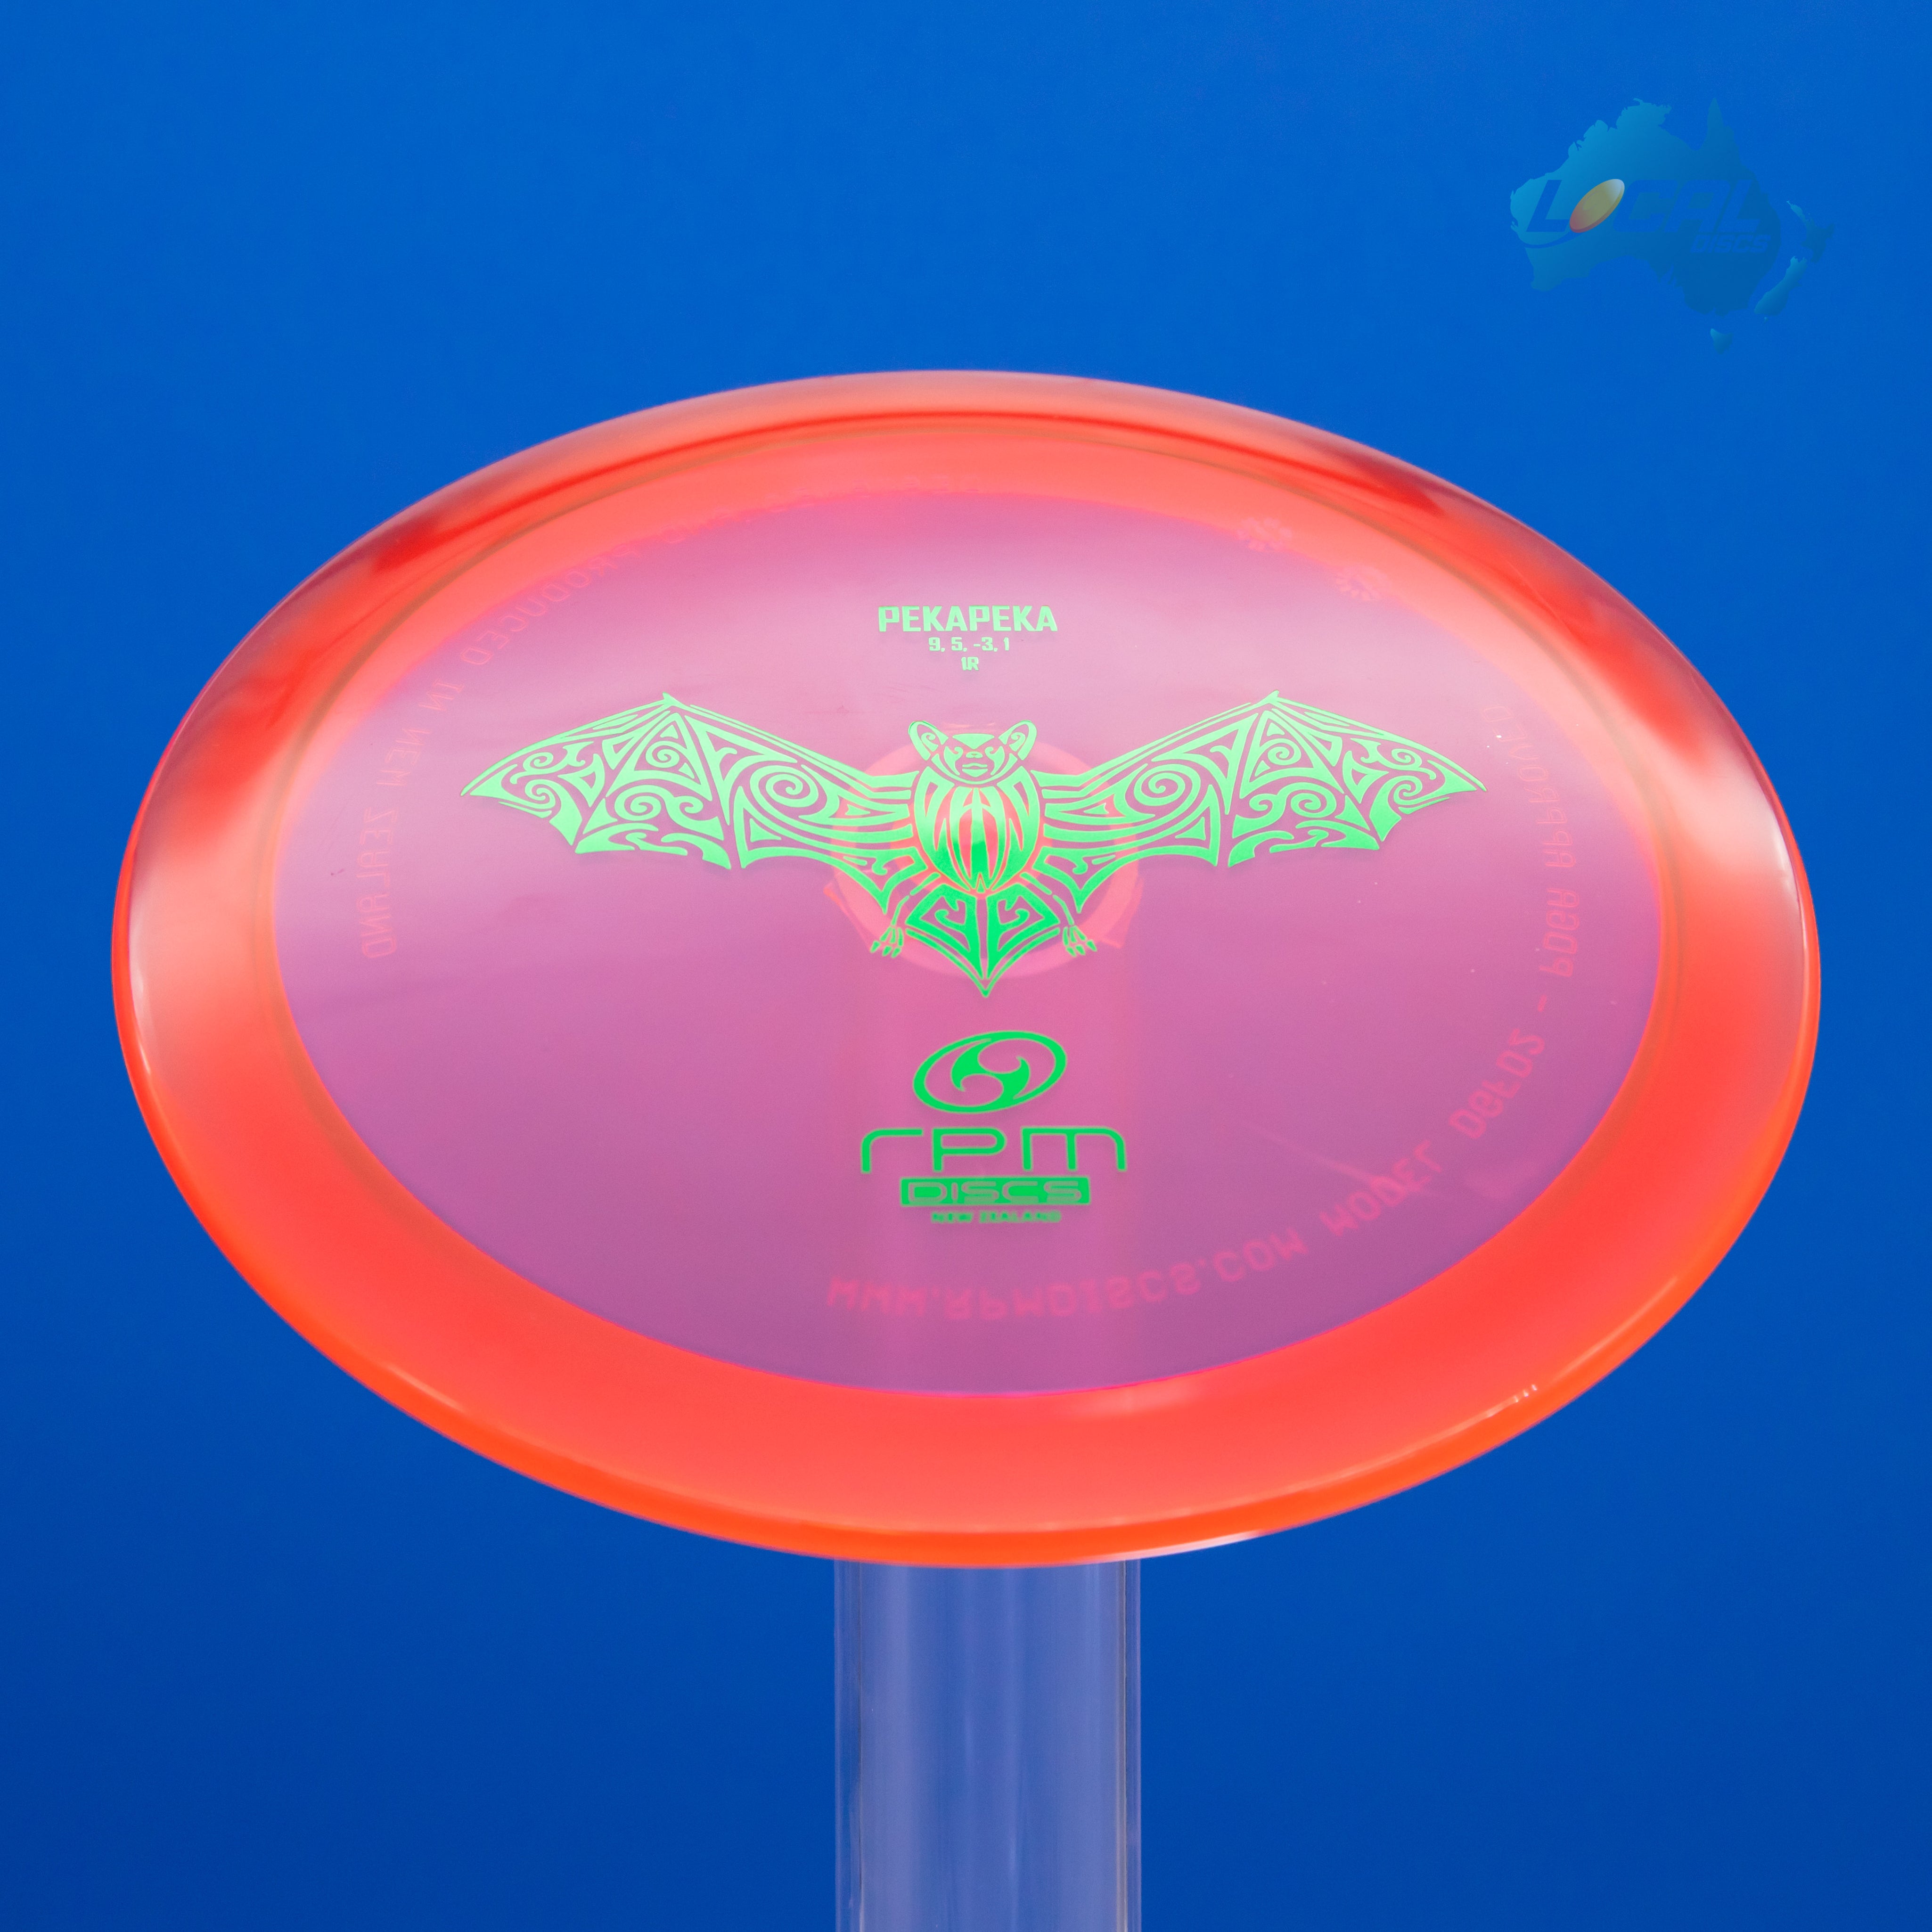 RPM Discs Pekapeka driver in pink on a blue background